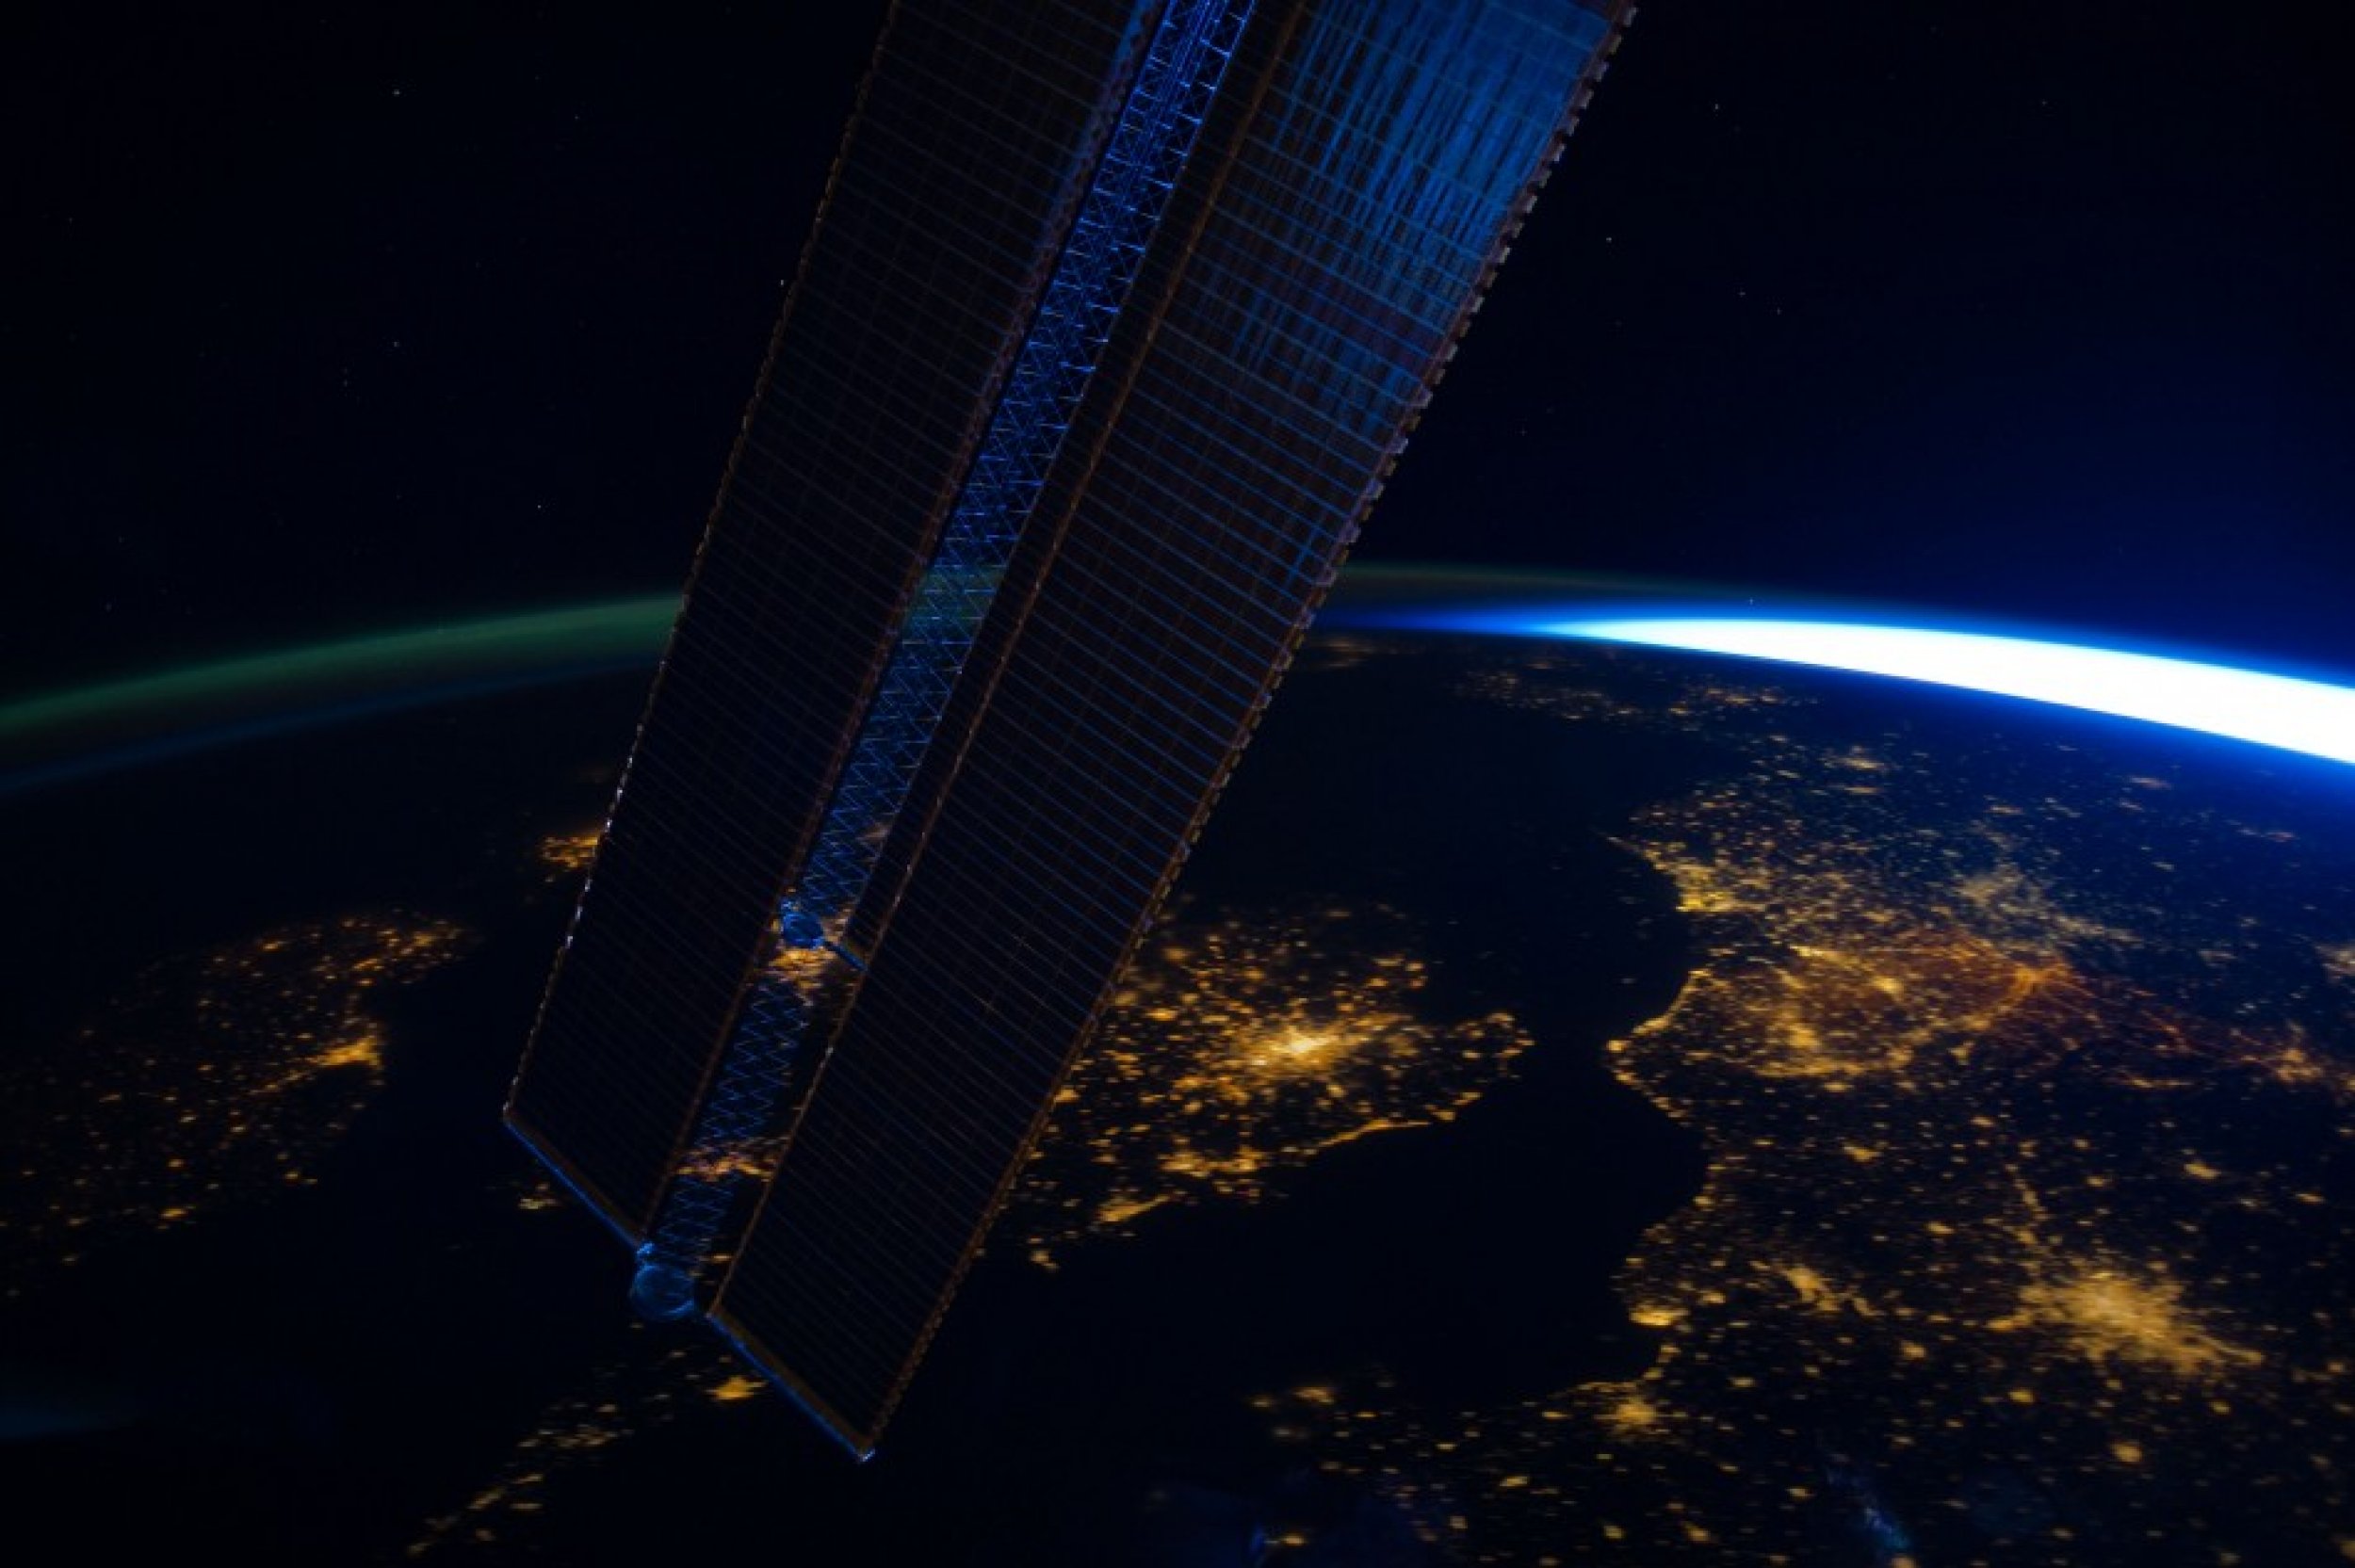 Space Station over Europe